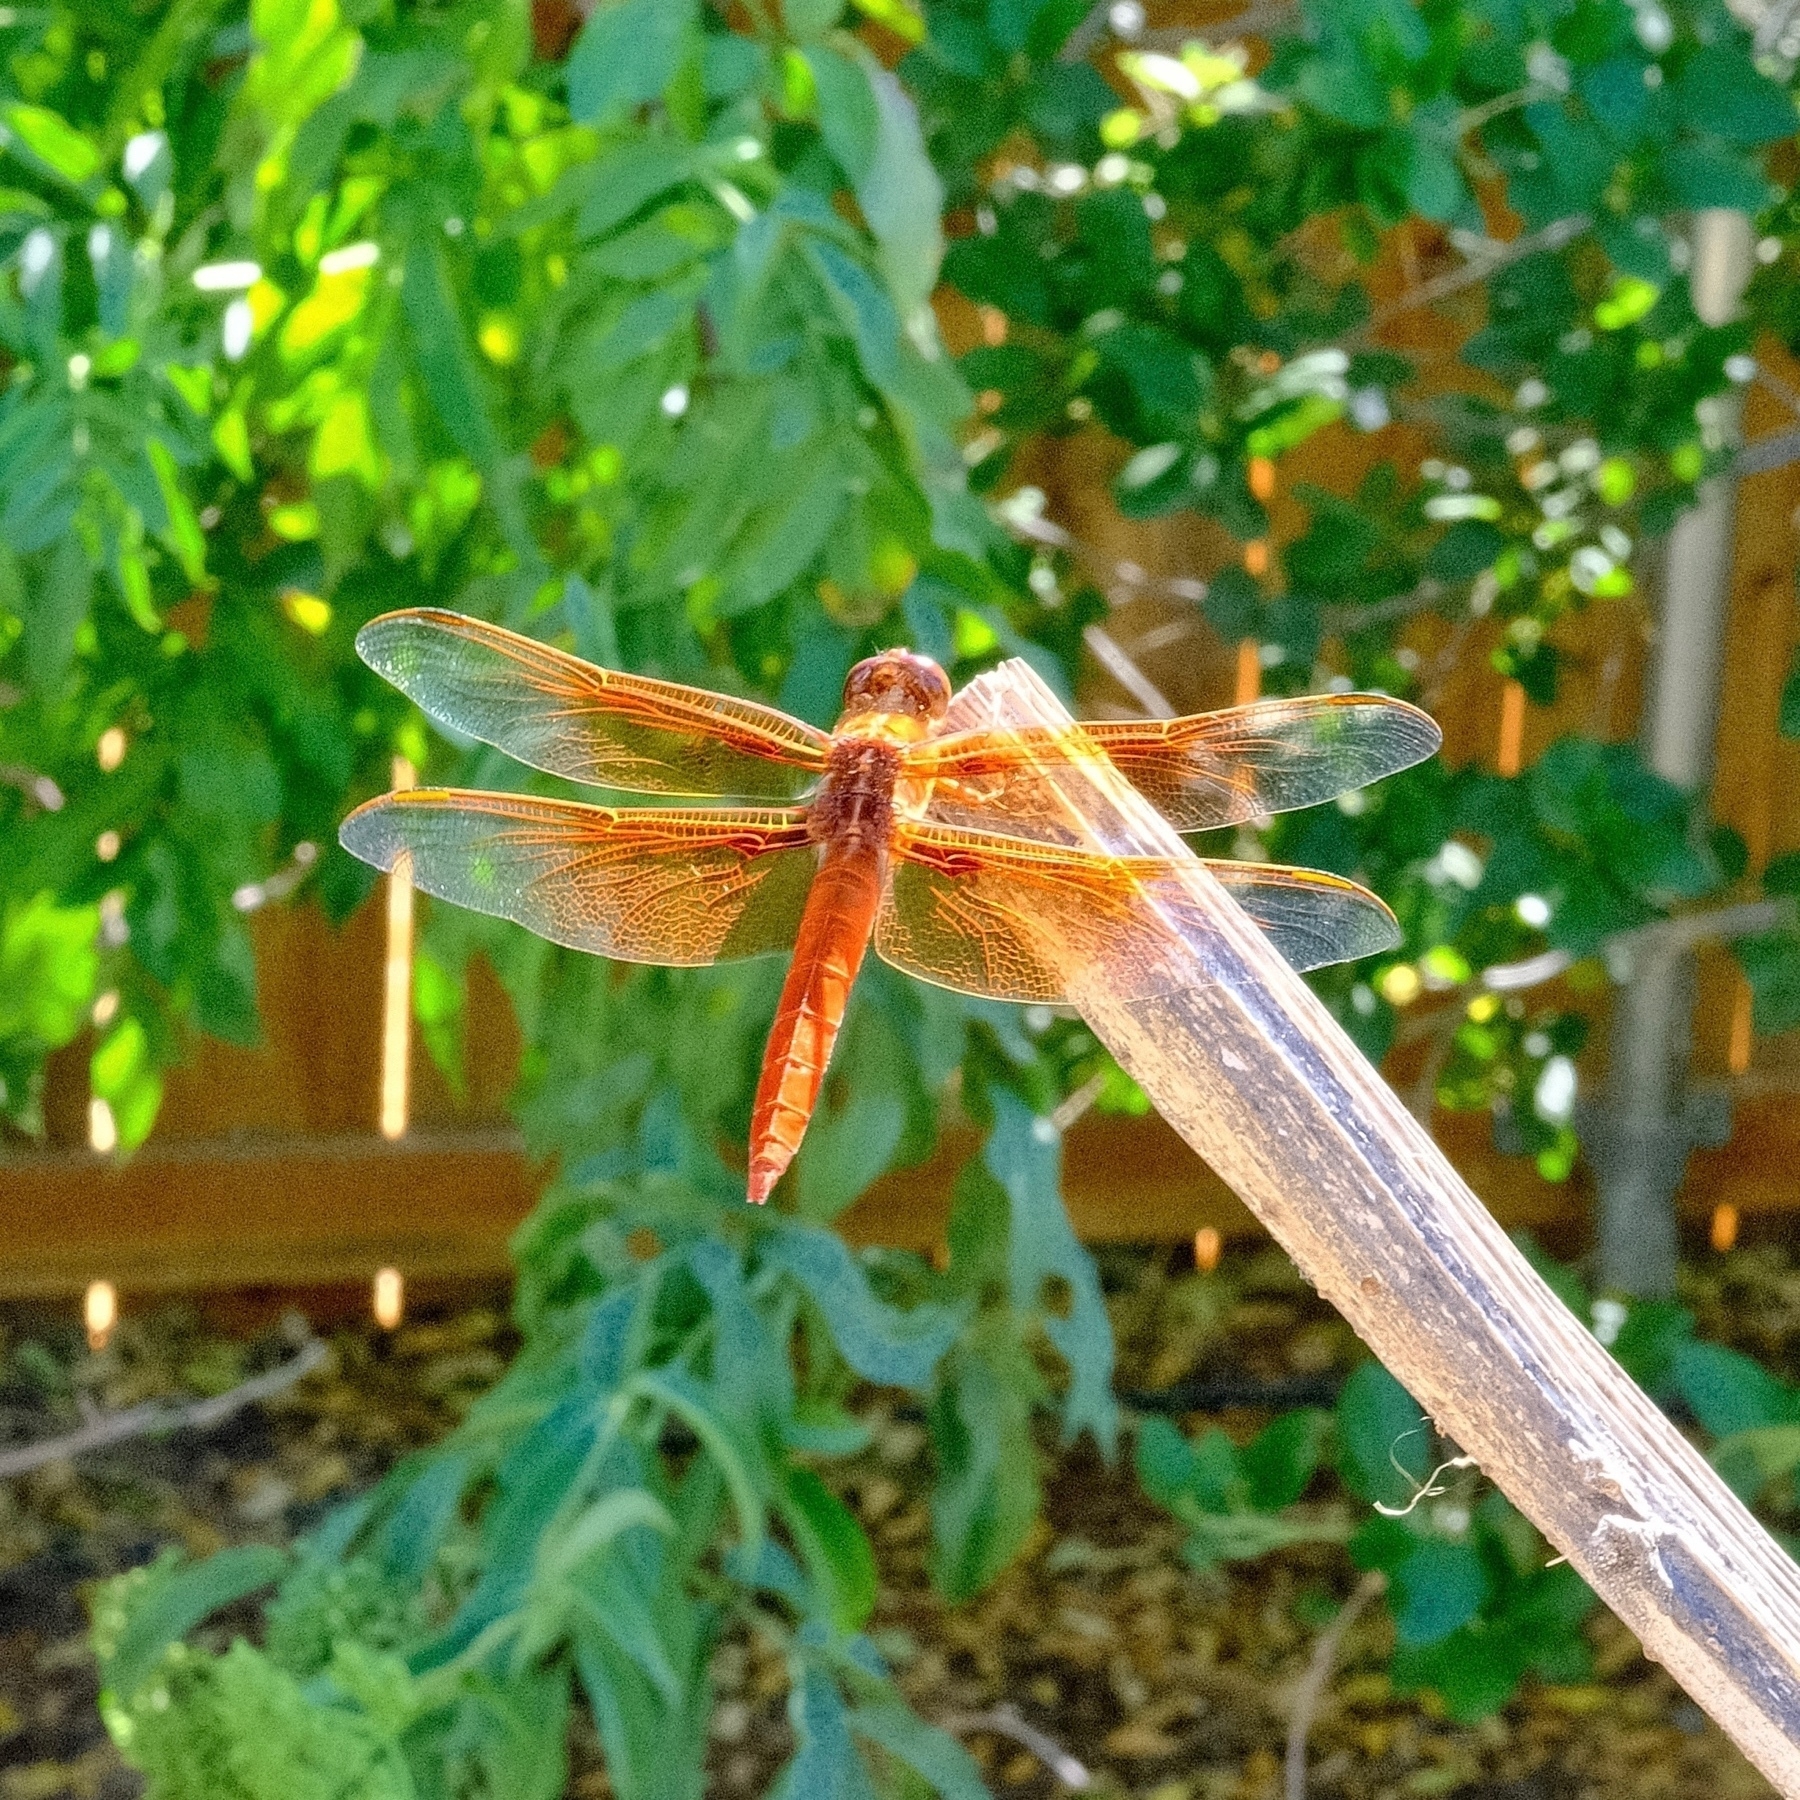 bright red and orange dragonfly on the tip of a sunflower stalk.